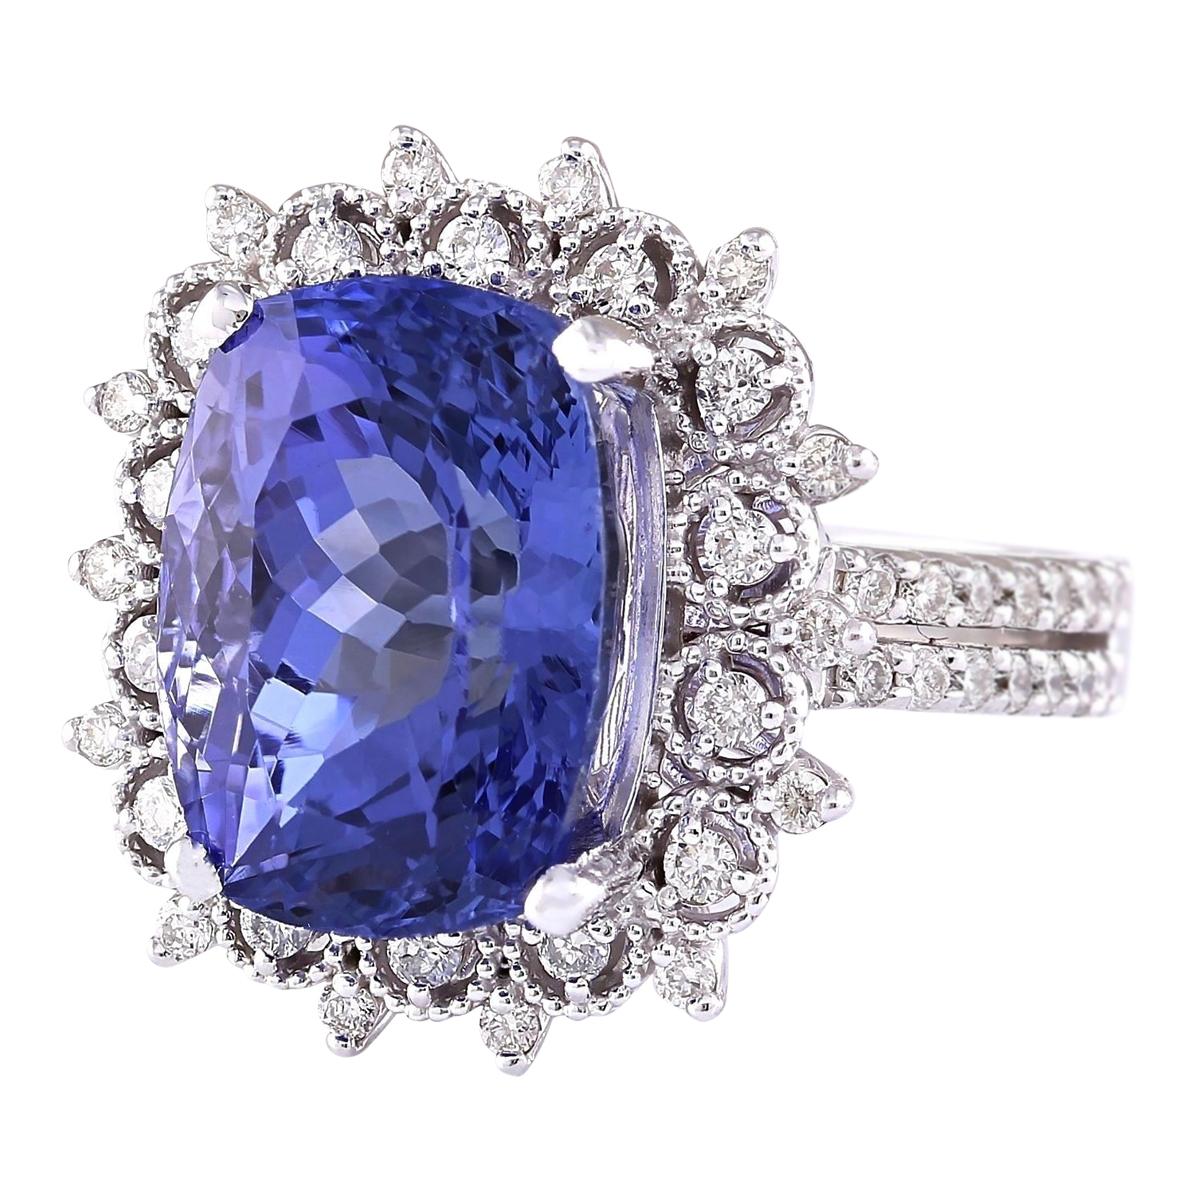 Experience the unparalleled allure of this exquisite Natural Tanzanite Diamond Ring, a captivating masterpiece crafted in opulent 14K White Gold. Weighing a remarkable 10.30 carats in total, this ring is a true embodiment of luxury and